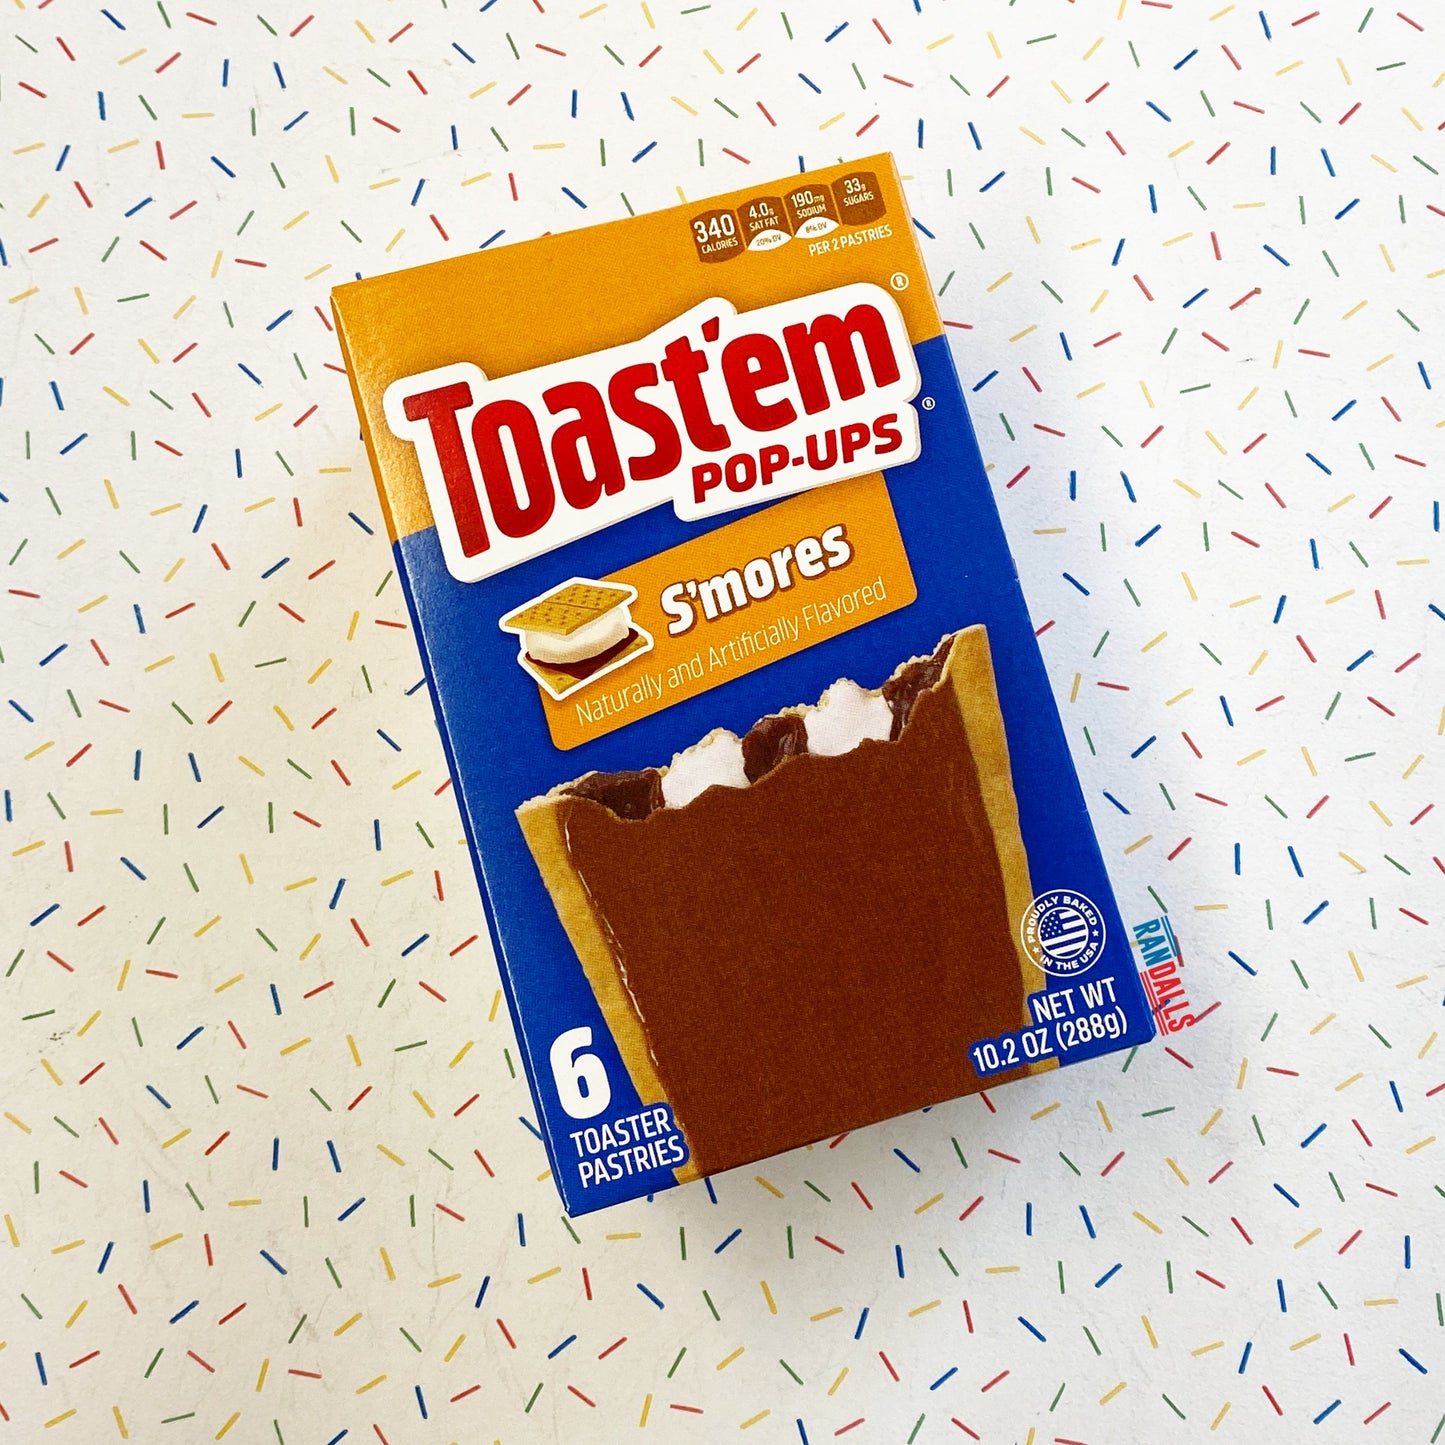 toast'em pop-ups, poptarts. s'mores, smores, chocolate, marshmallow, graham cracker, breakfast, toaster pastries, pastry